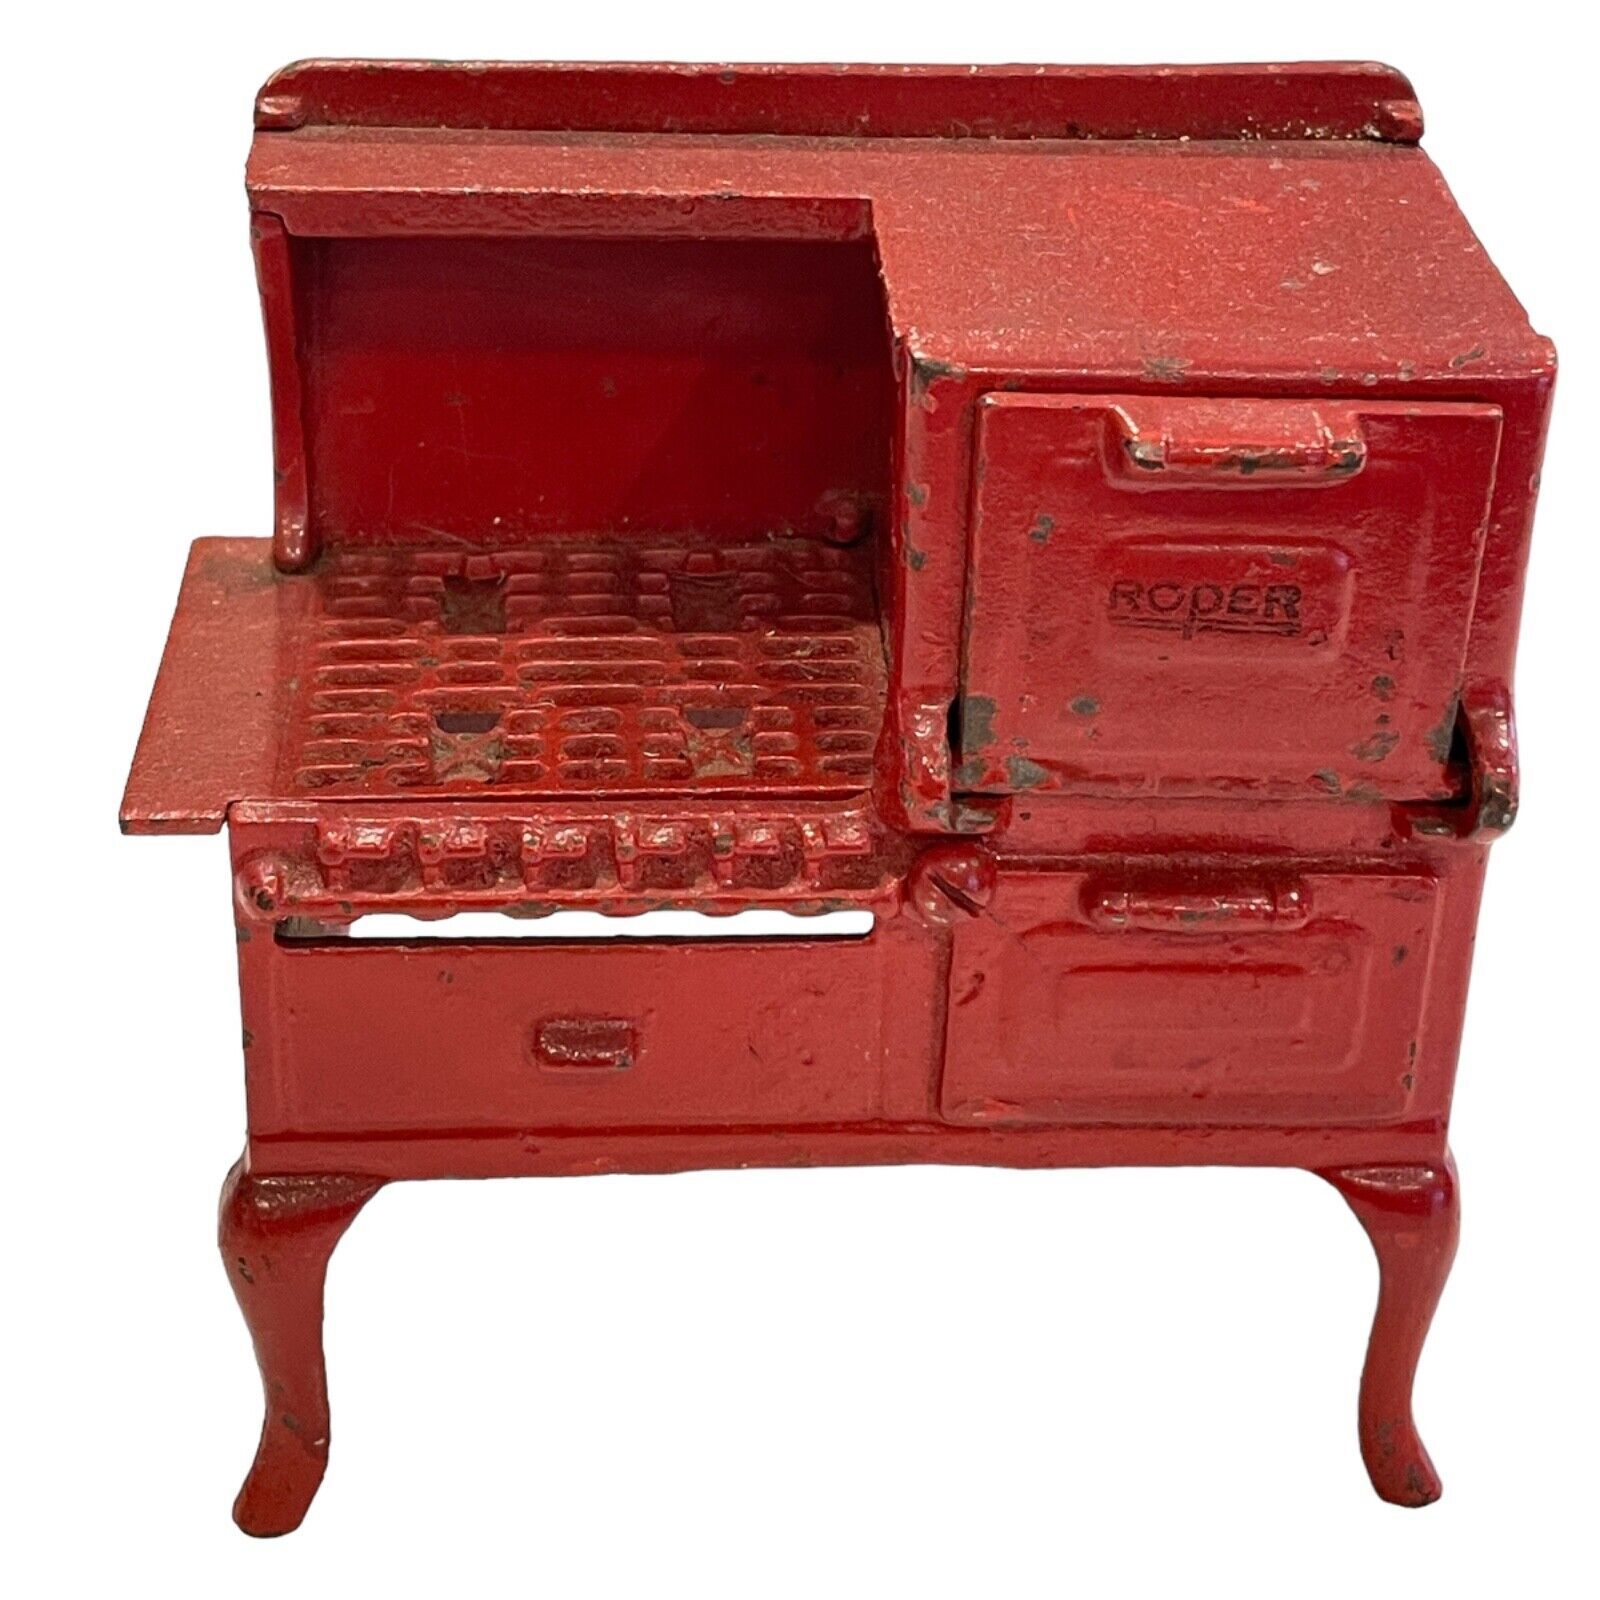 1920's Arcade Co. Cast Iron Toy Roper Gas Stove Red Miniature Dollhouse Antique - $123.74